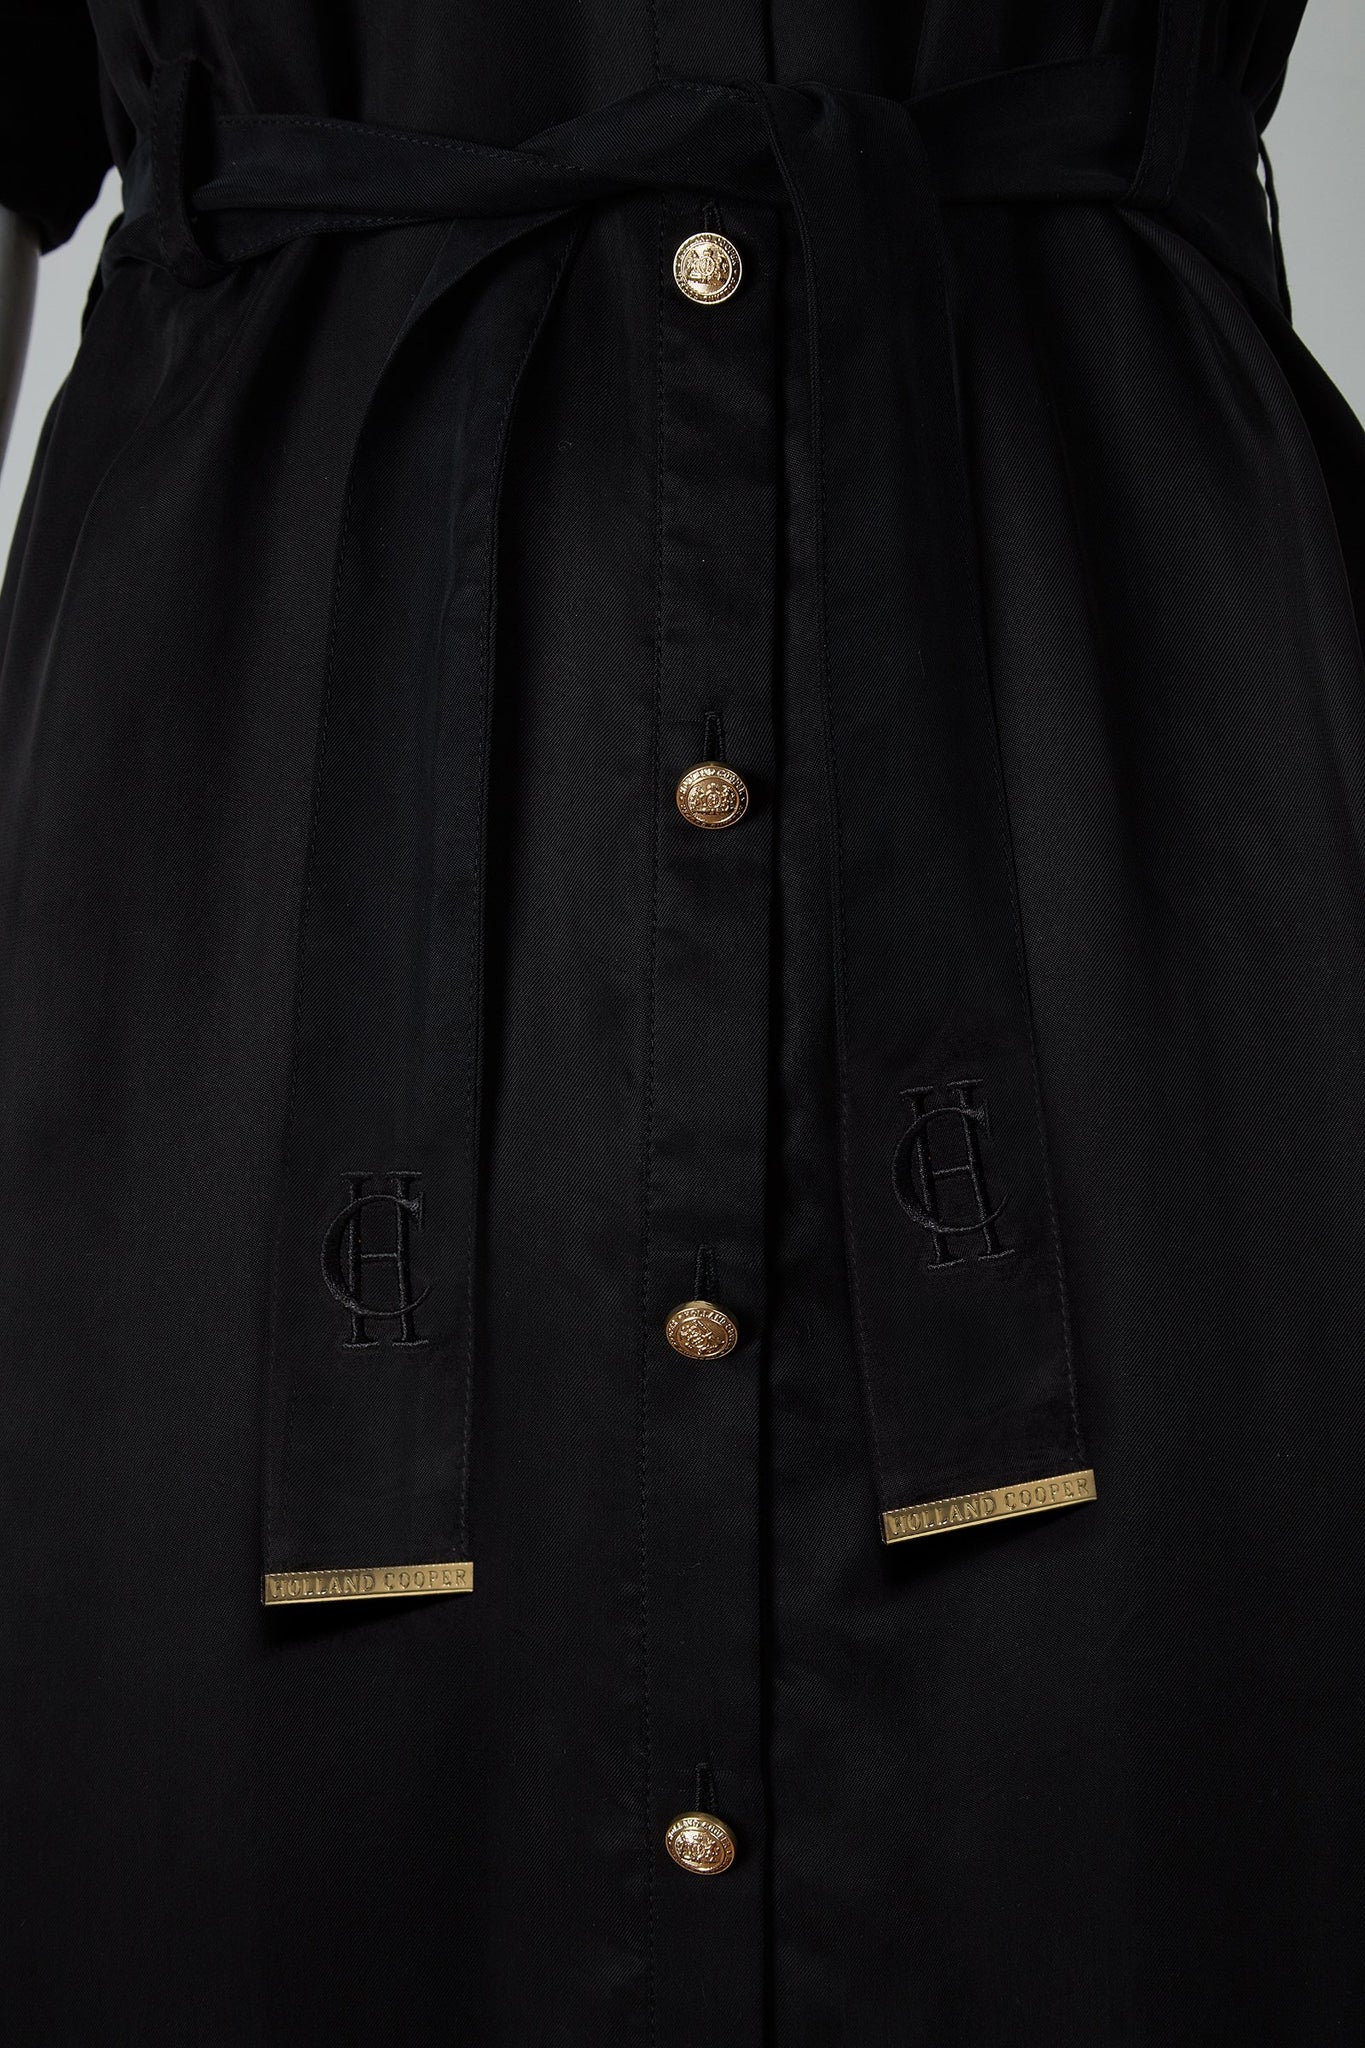 detail shot of gold buttons on womens black military midi shirt dress with tie around waist and gold buttons down the front